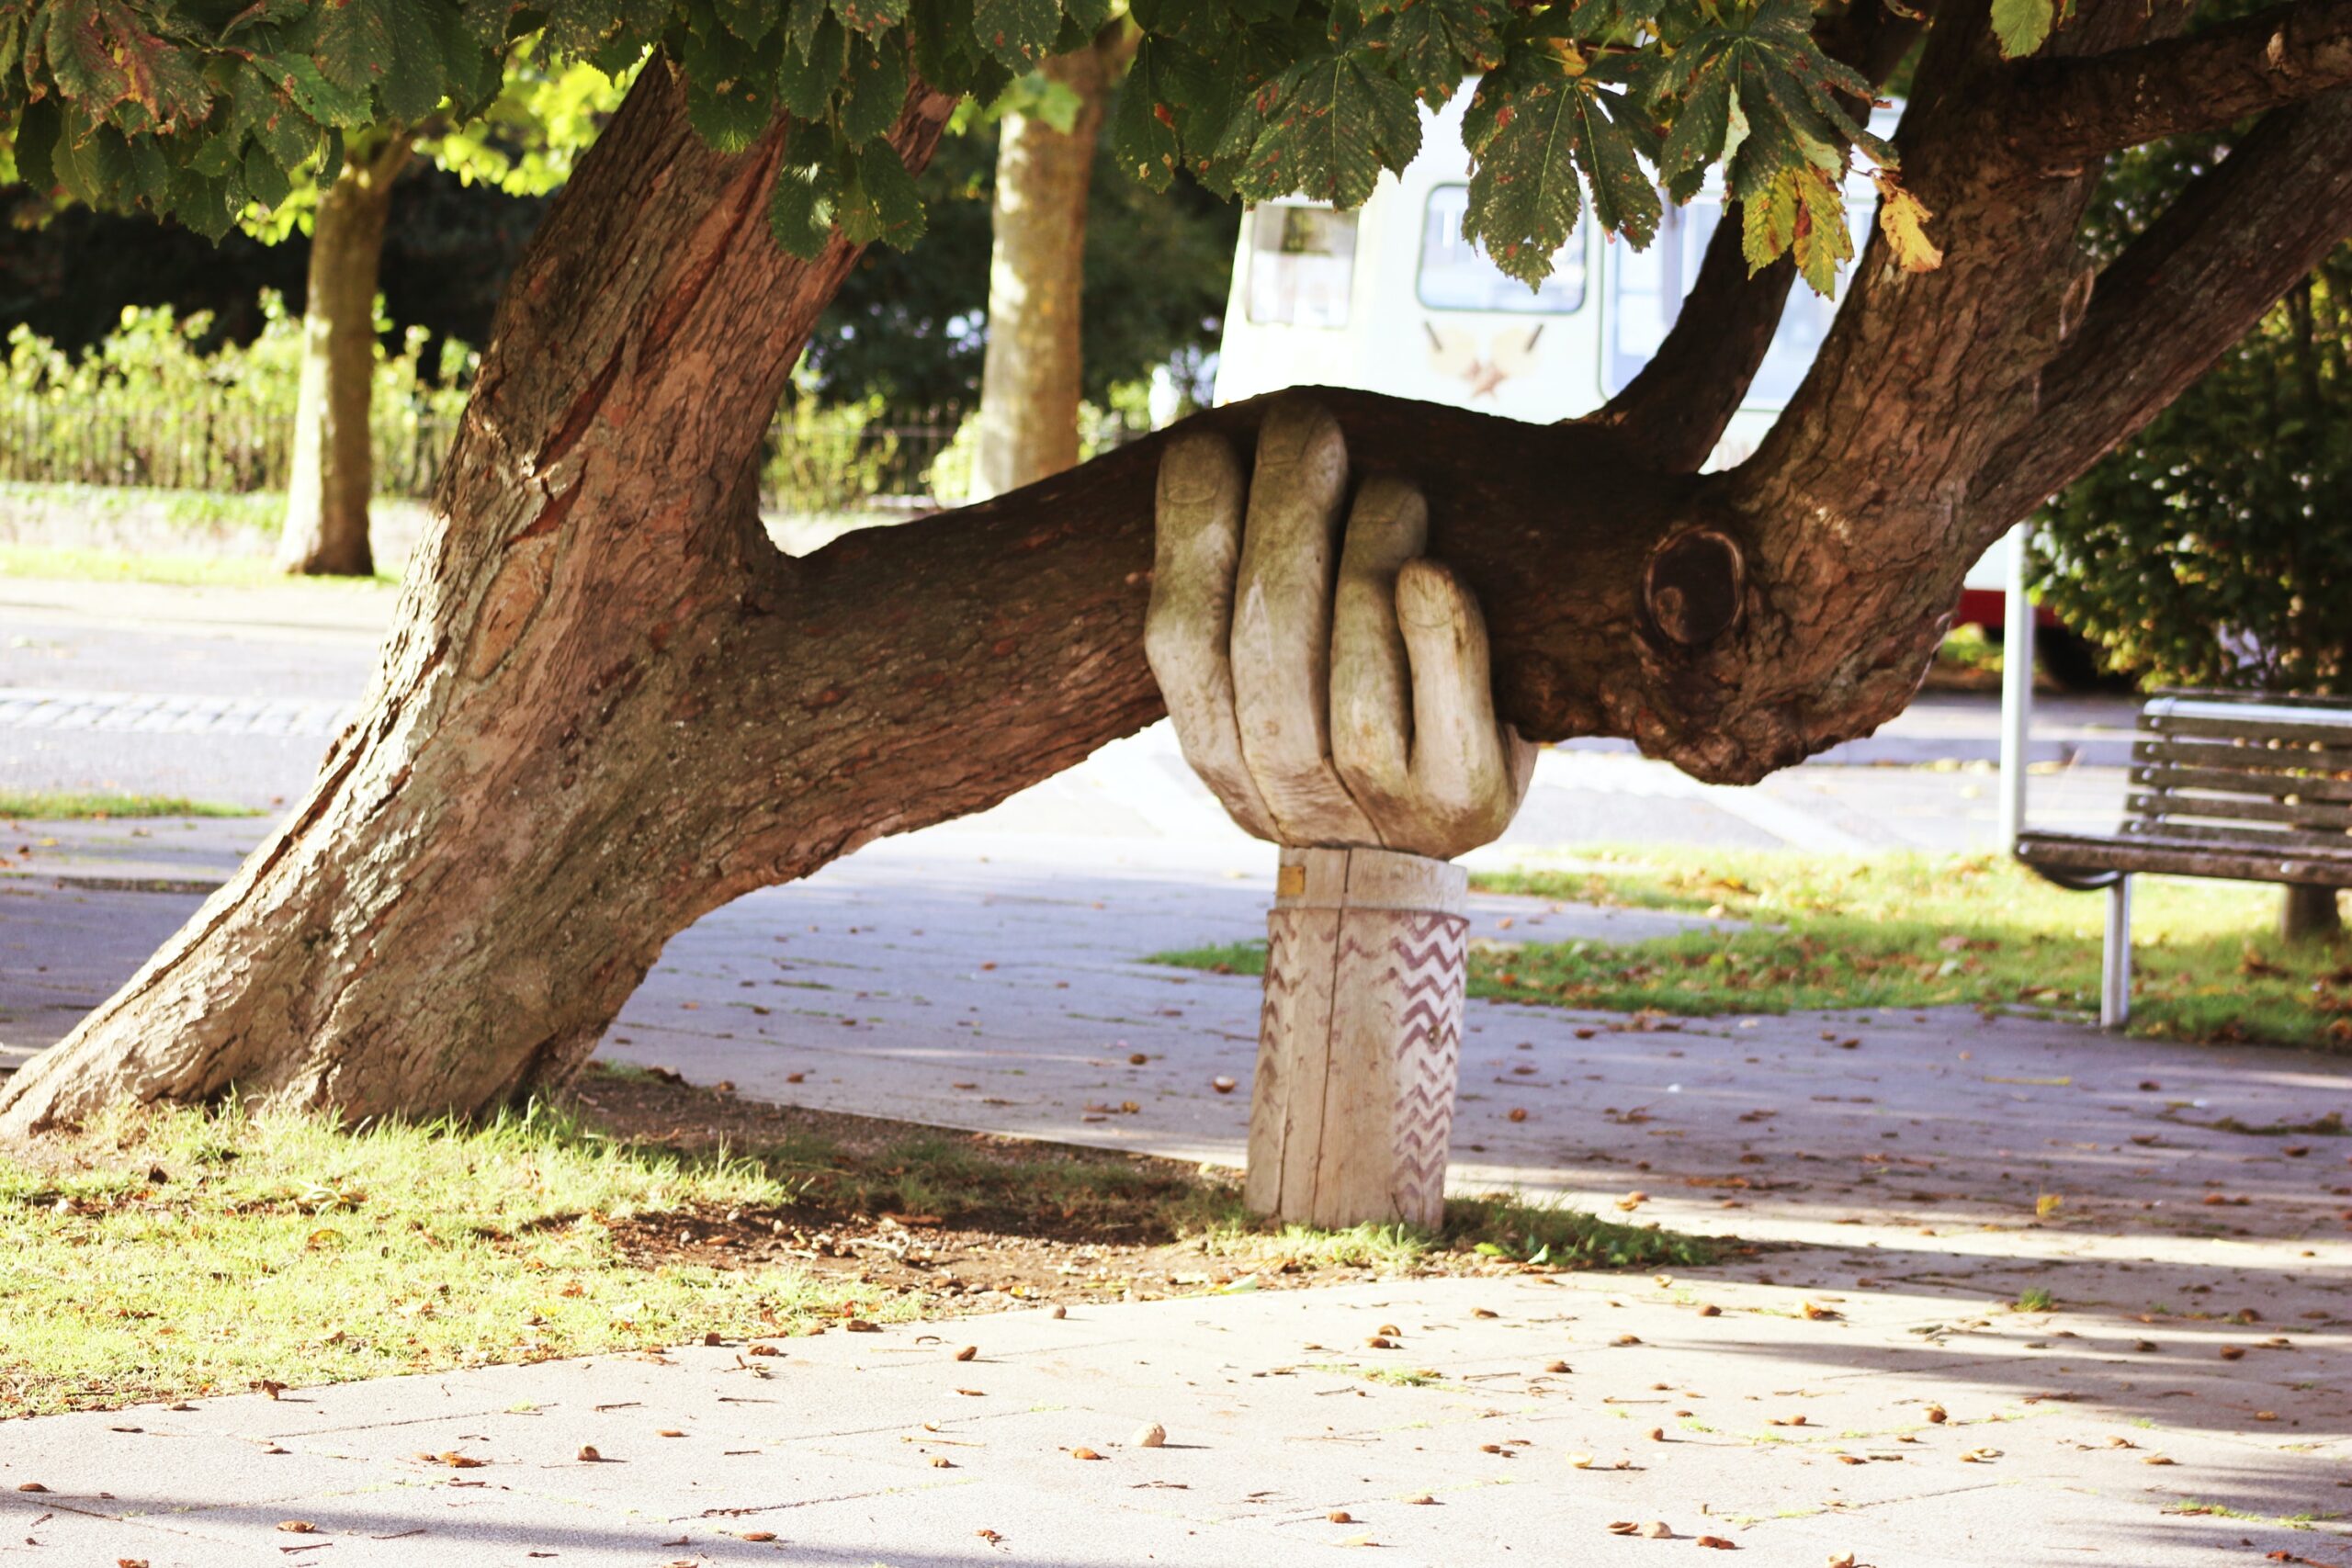 A stone hand holding up a tree branch